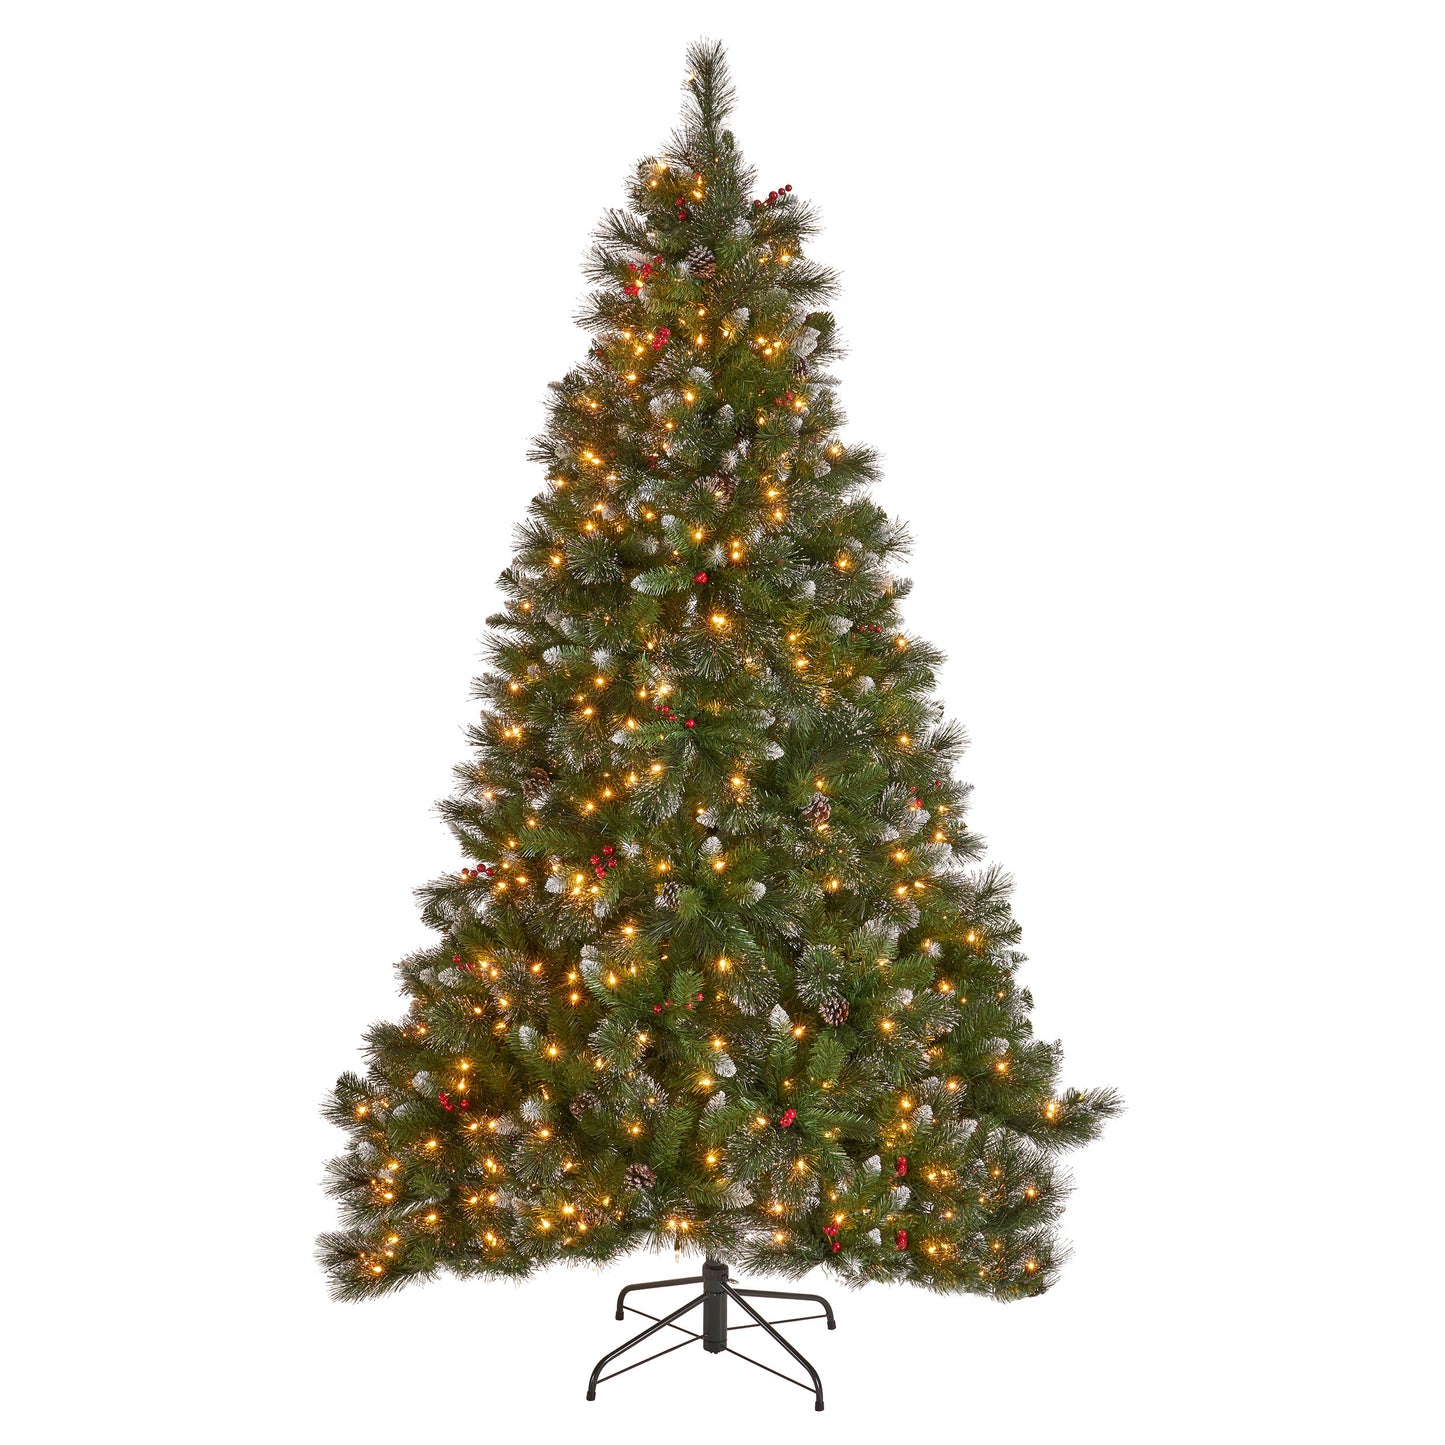 7-foot Mixed Spruce Hinged Artificial Christmas Tree with Glitter Branches, Red Berries, and Pinecones